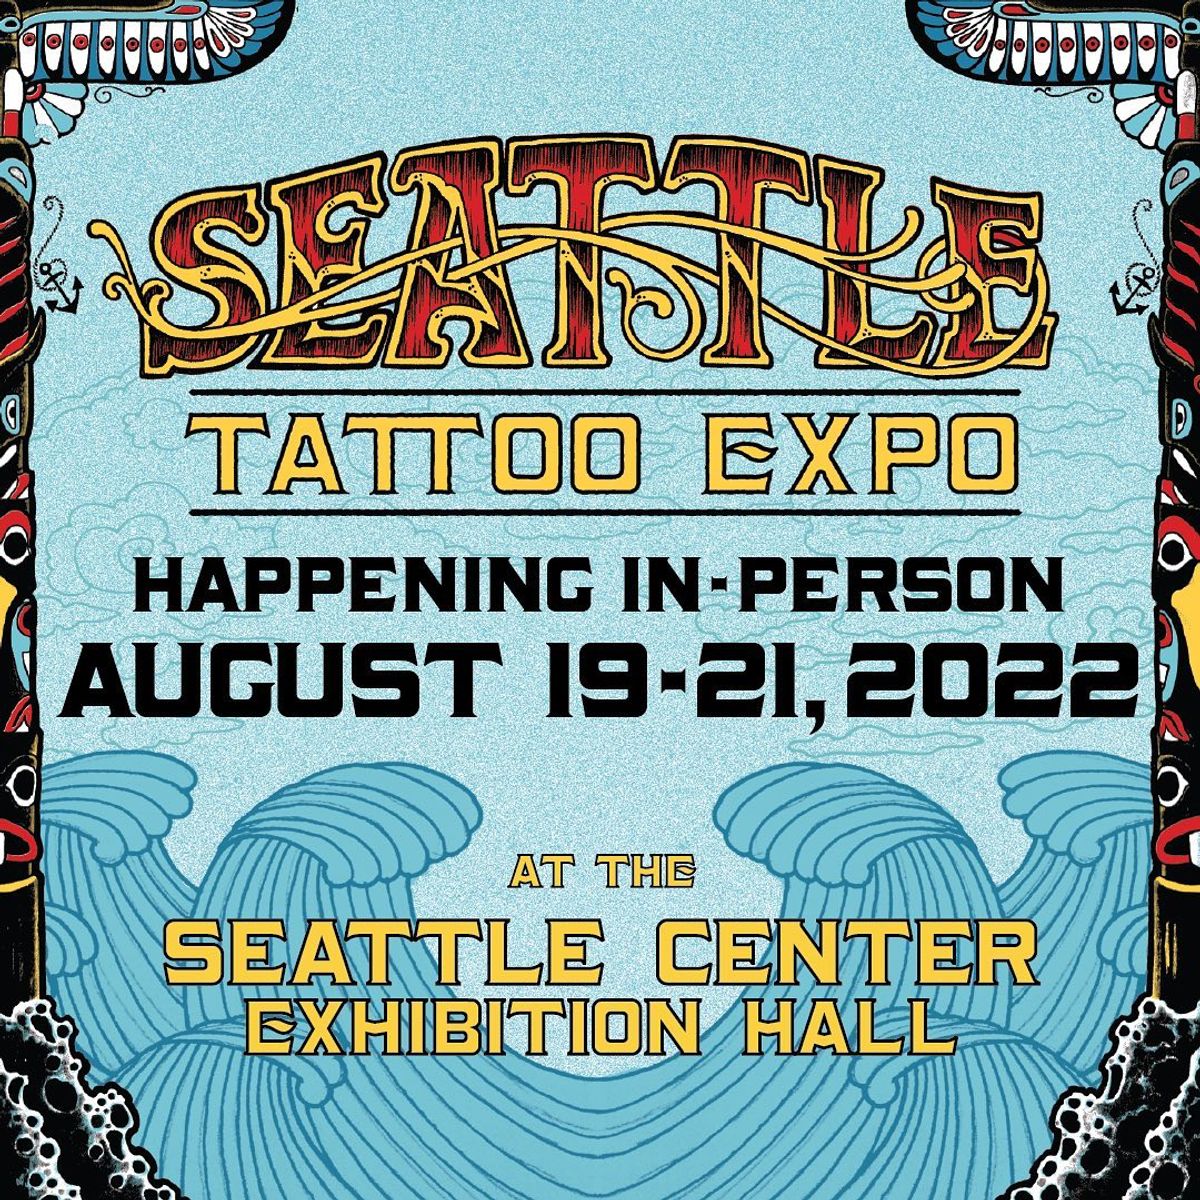 Seattle Tattoo Expo 2022 at Seattle Center Exhibition Hall in Seattle